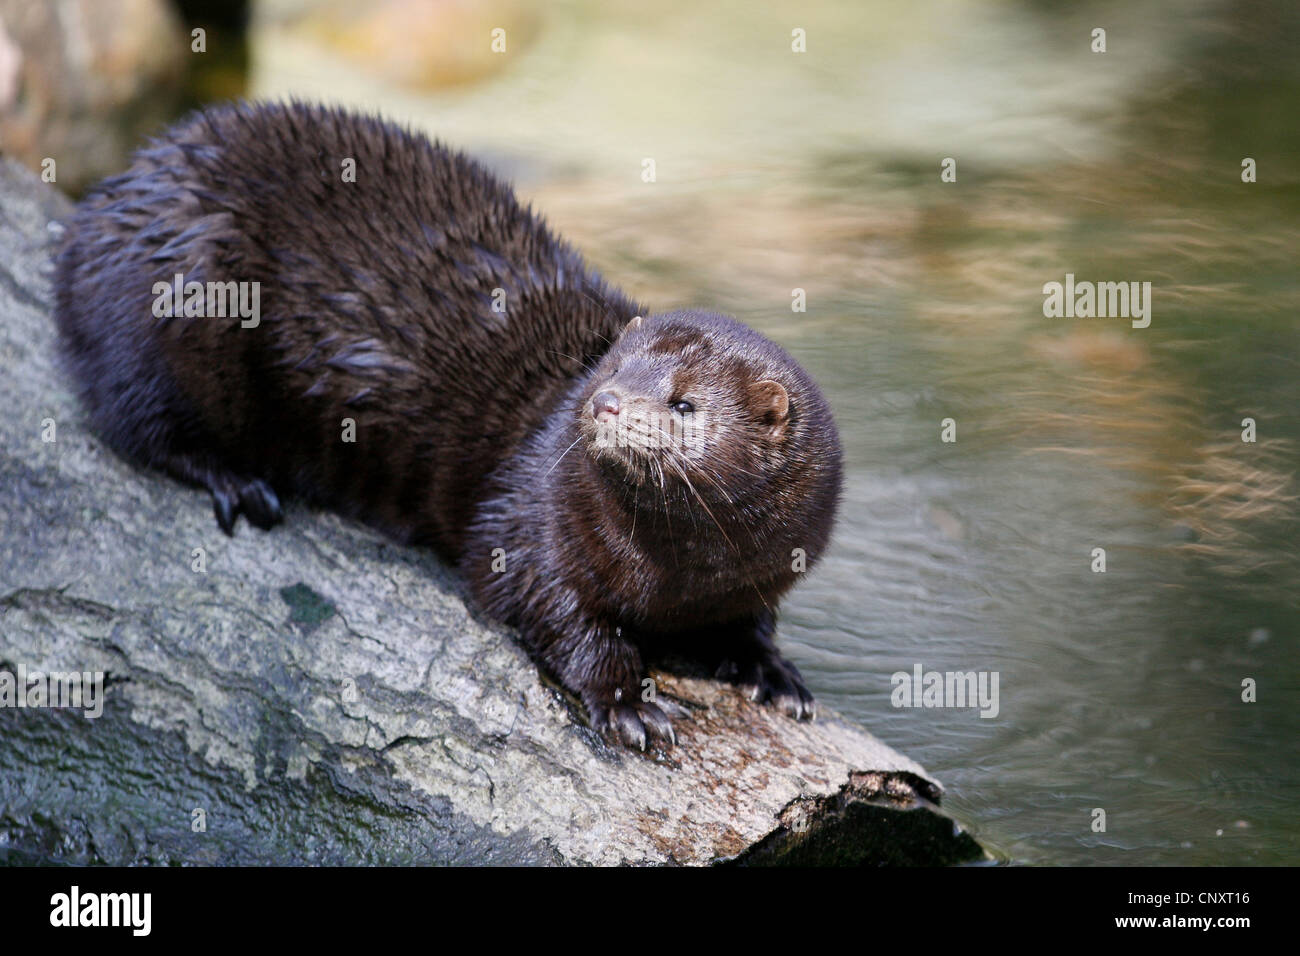 American mink (Mustela vison), sitting on a log at a riverside, Germany Stock Photo